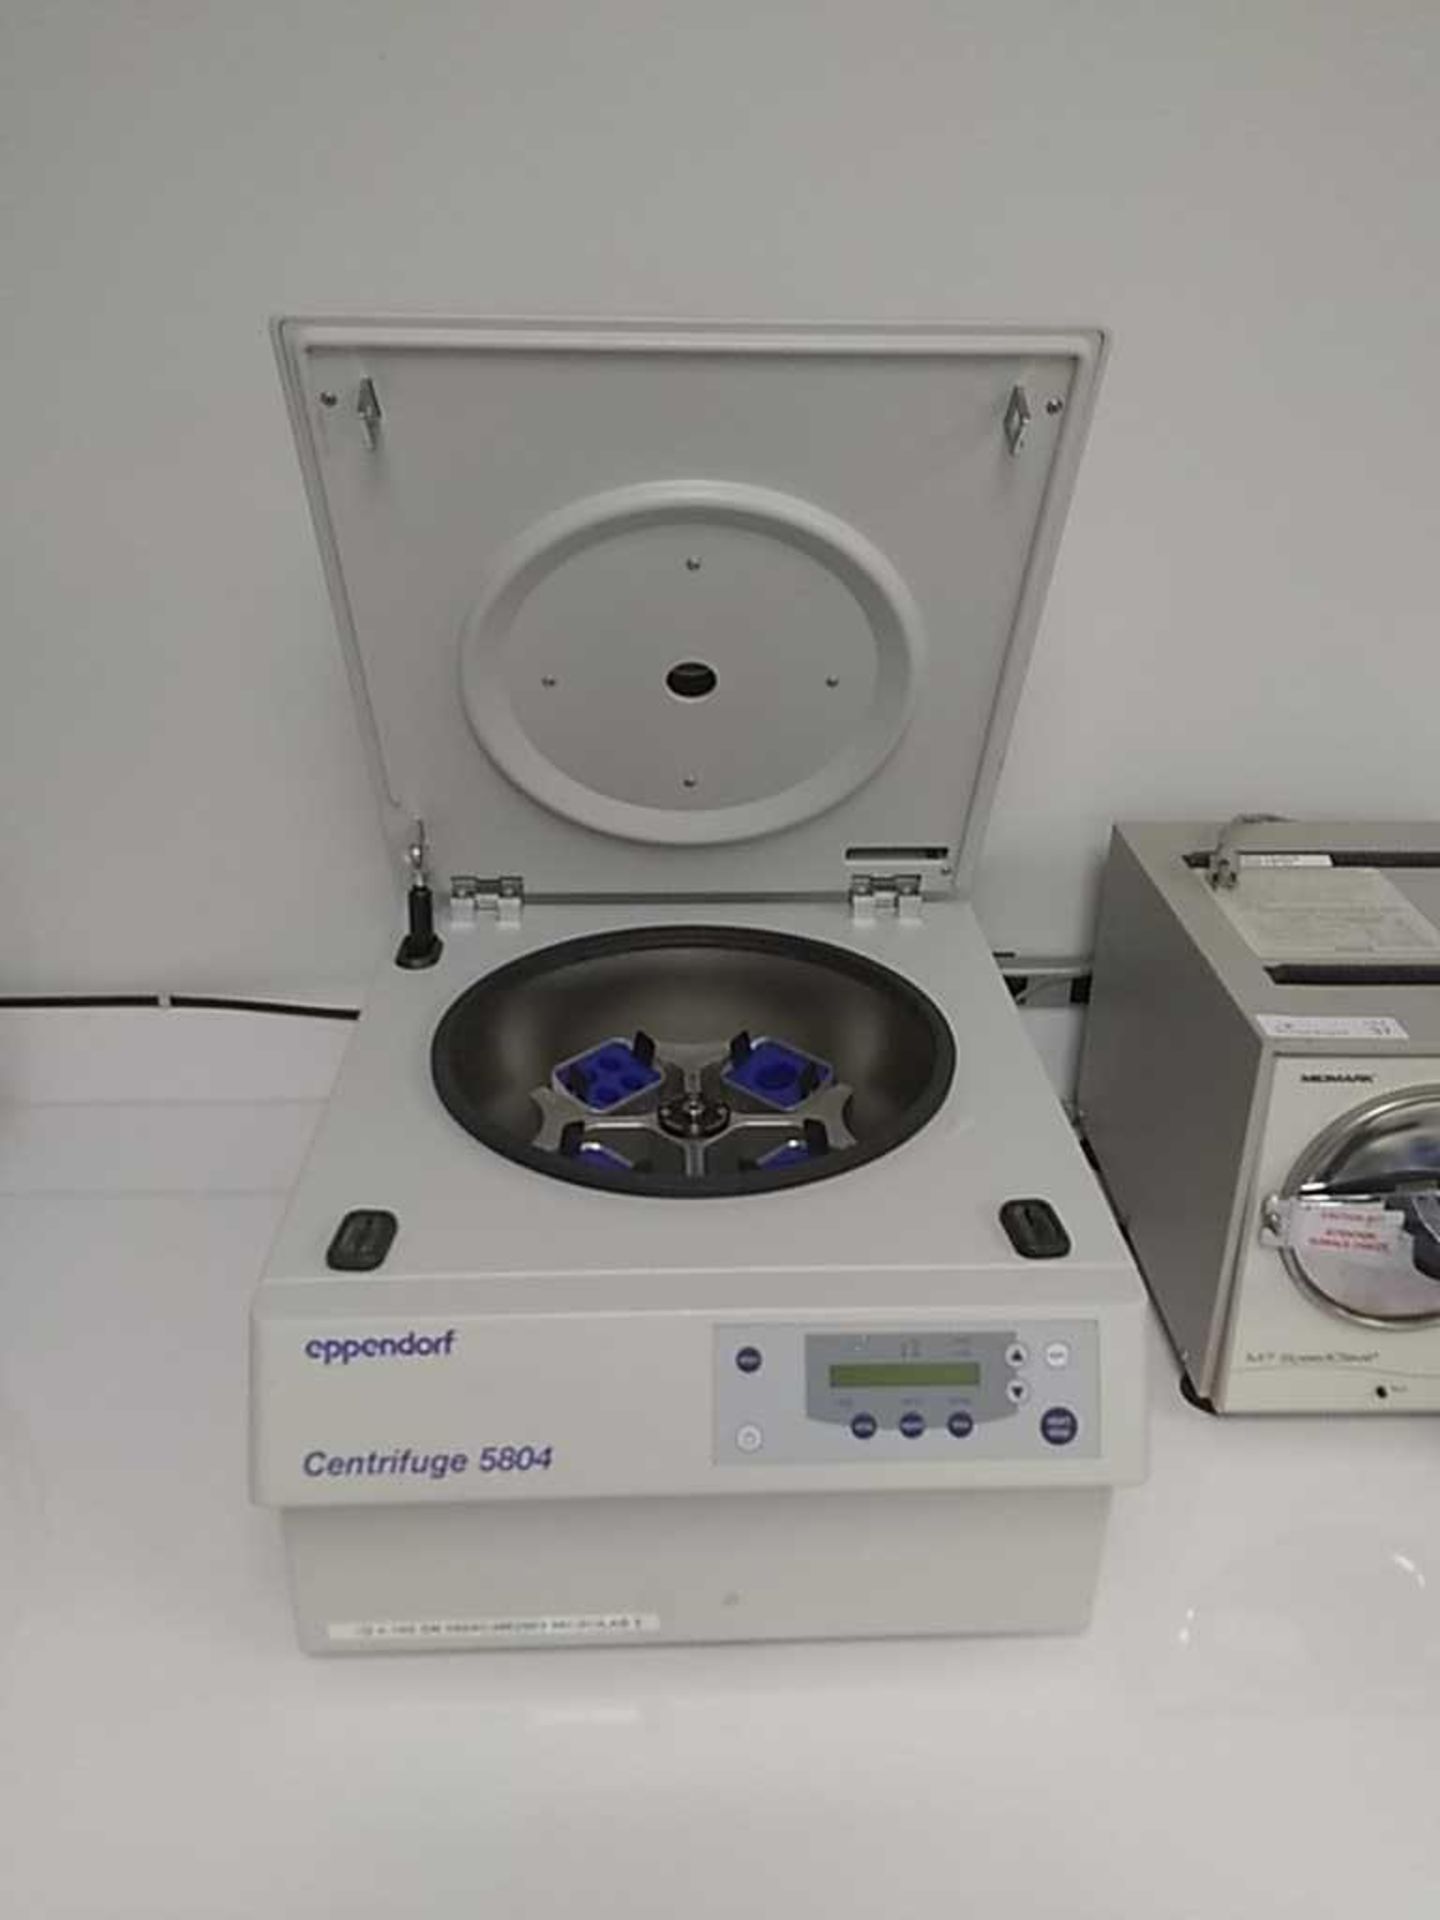 Eppendorf 5804 Benchtop Centrifuge With Rotor